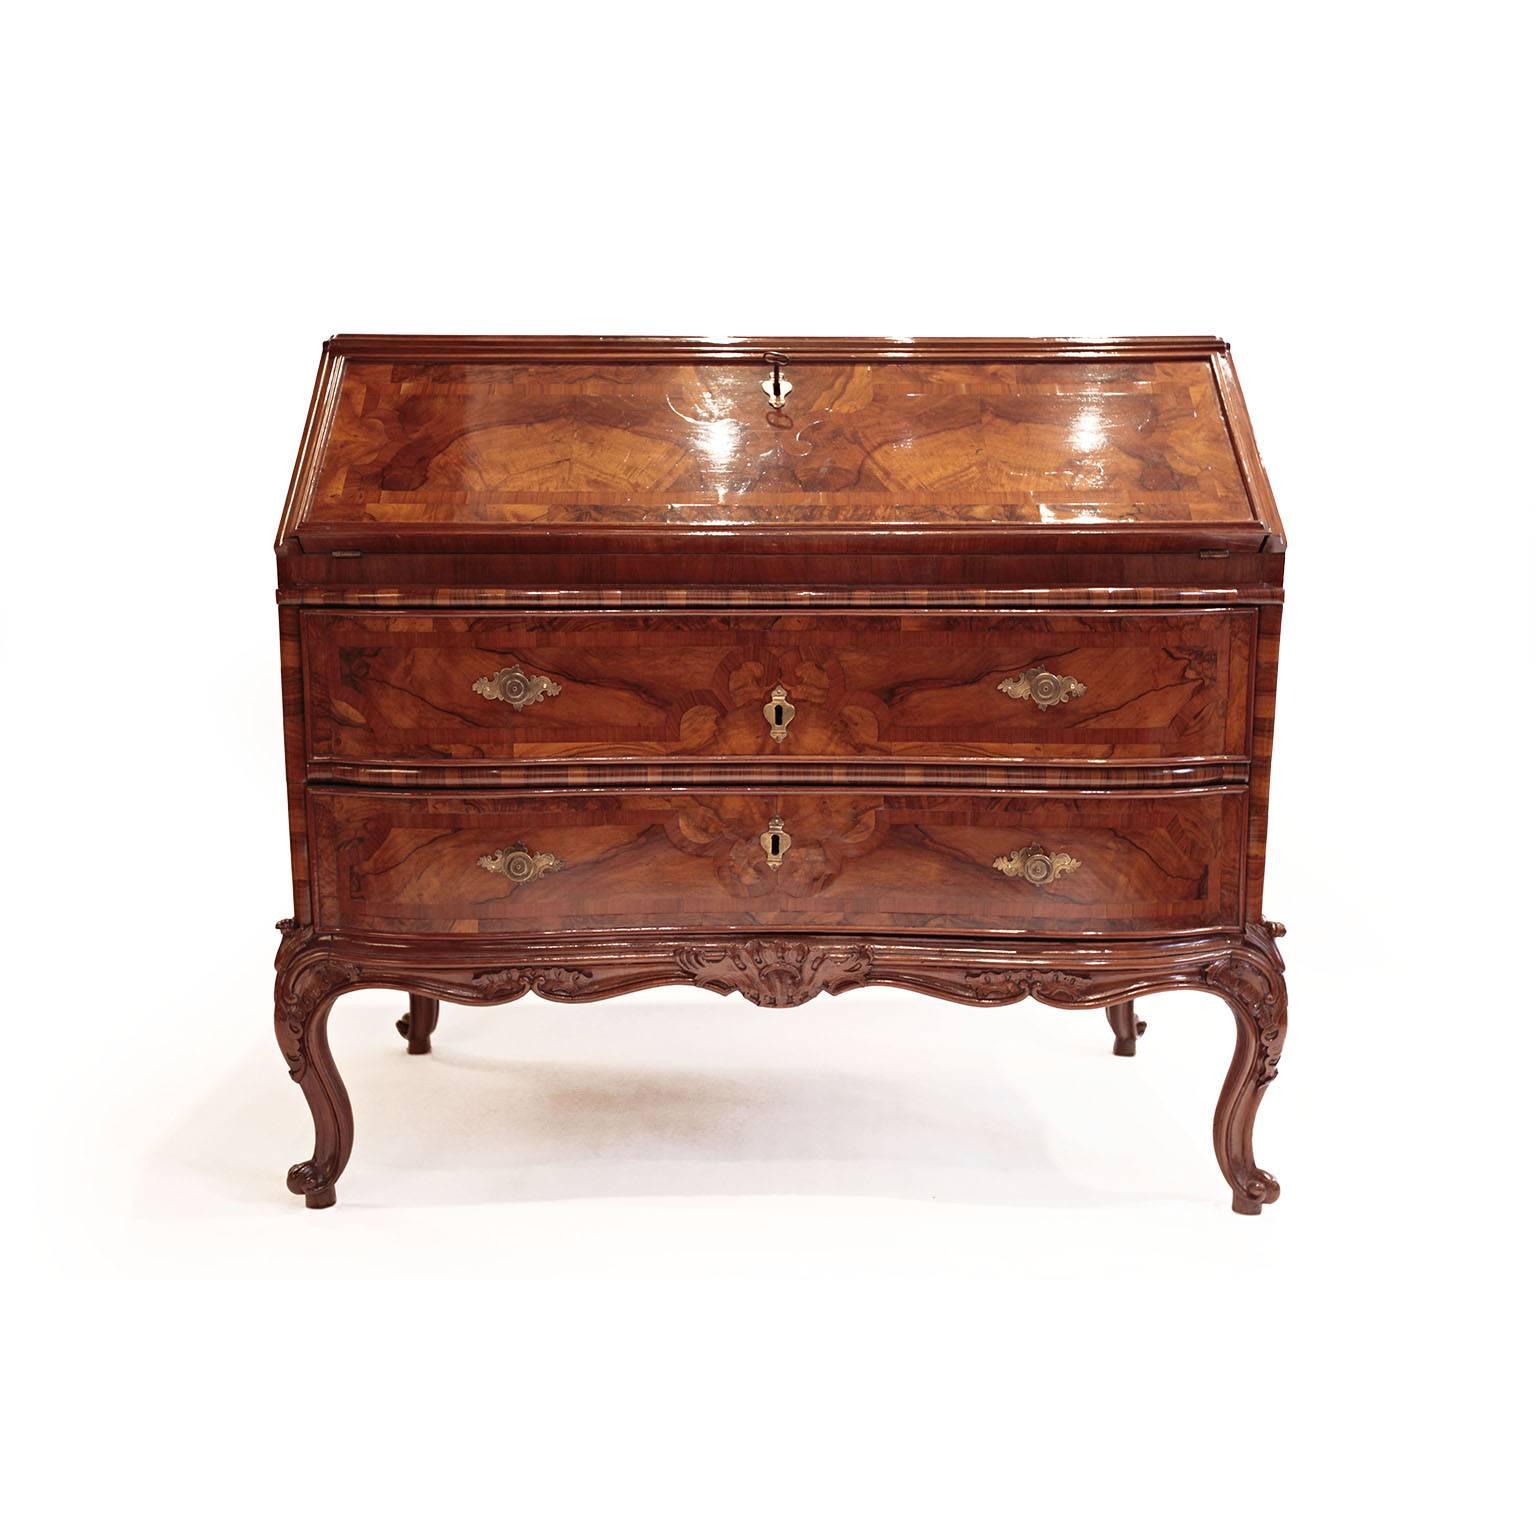 Very fine and elegant Italian bureau from Ferrara province.
Walnut blur veneer. Fine inlay on drawers, slant and sides.
Light moulded front and carved wood legs and base.
A slant front with enclosed four shot drawers and an open space with